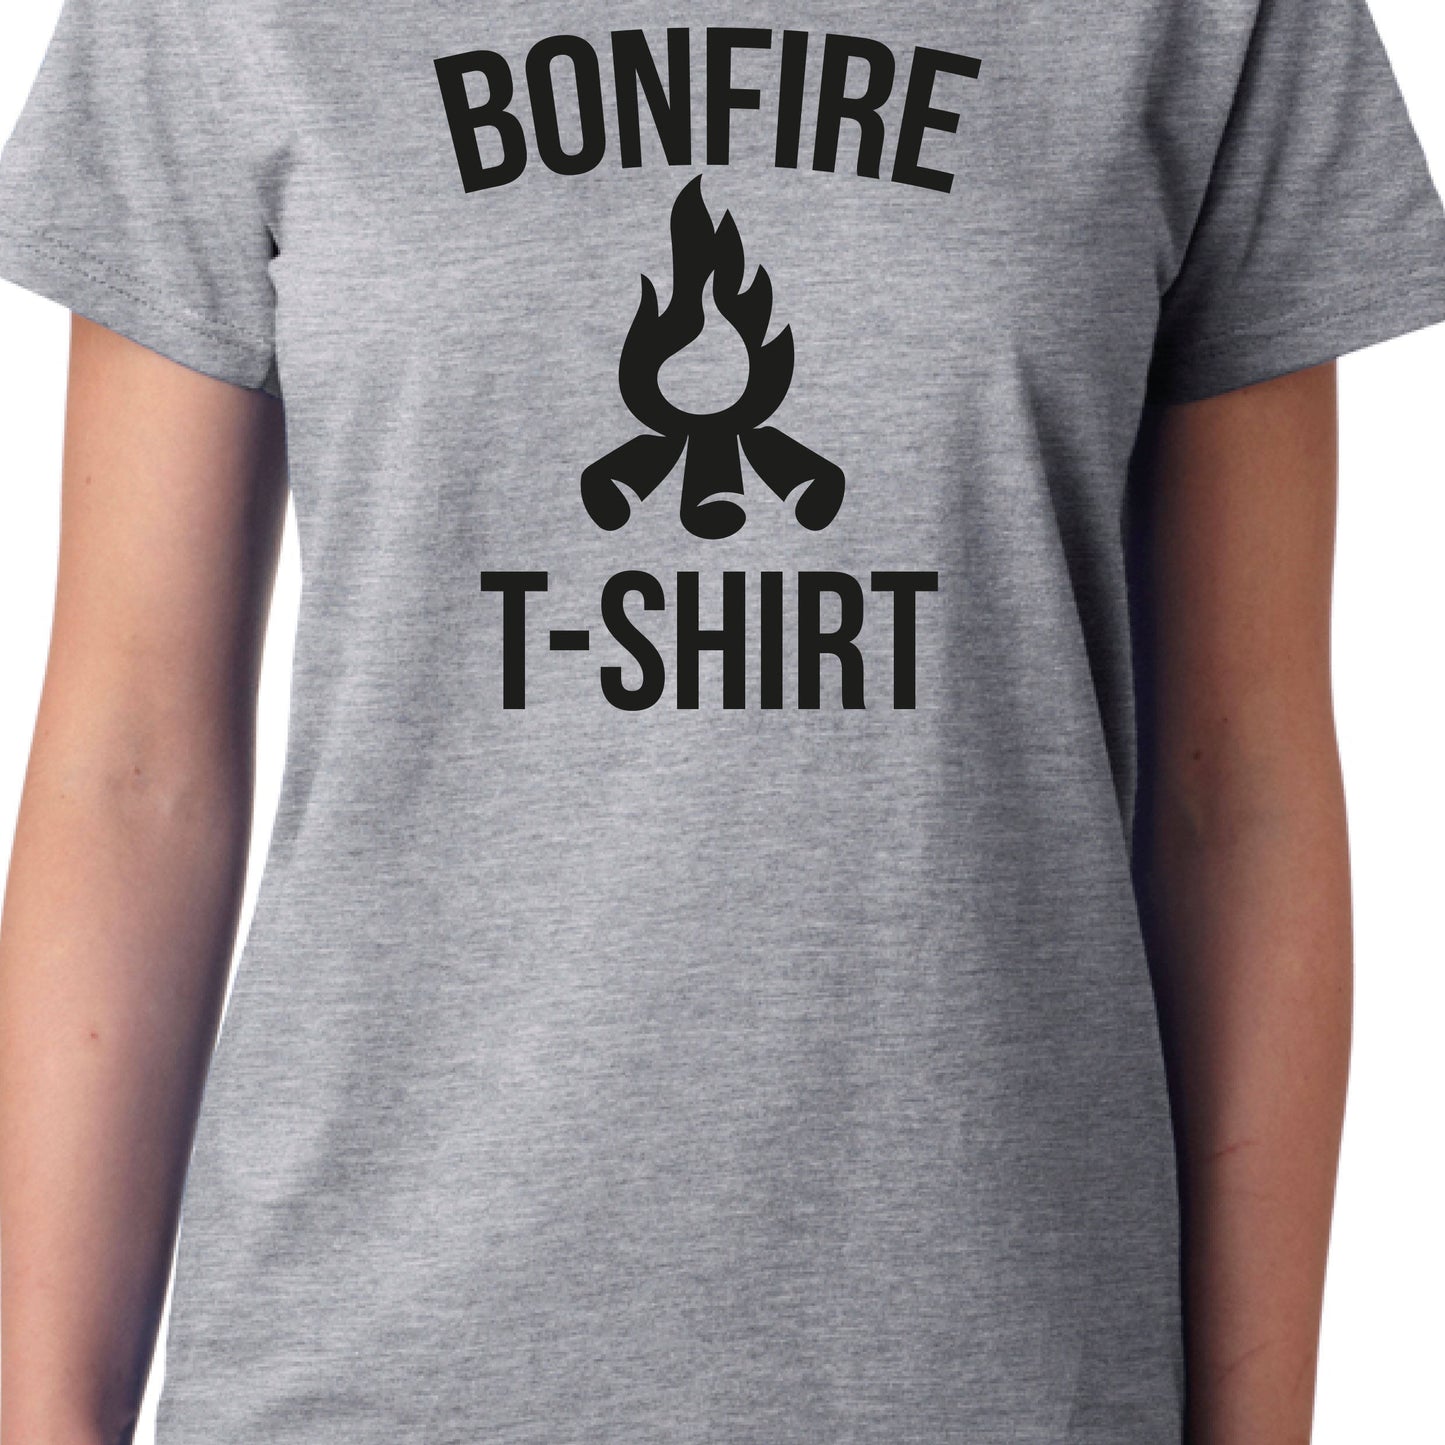 Bonfire T-Shirt, Cool, Funny, Guy Fawkes' Night, Fireworks